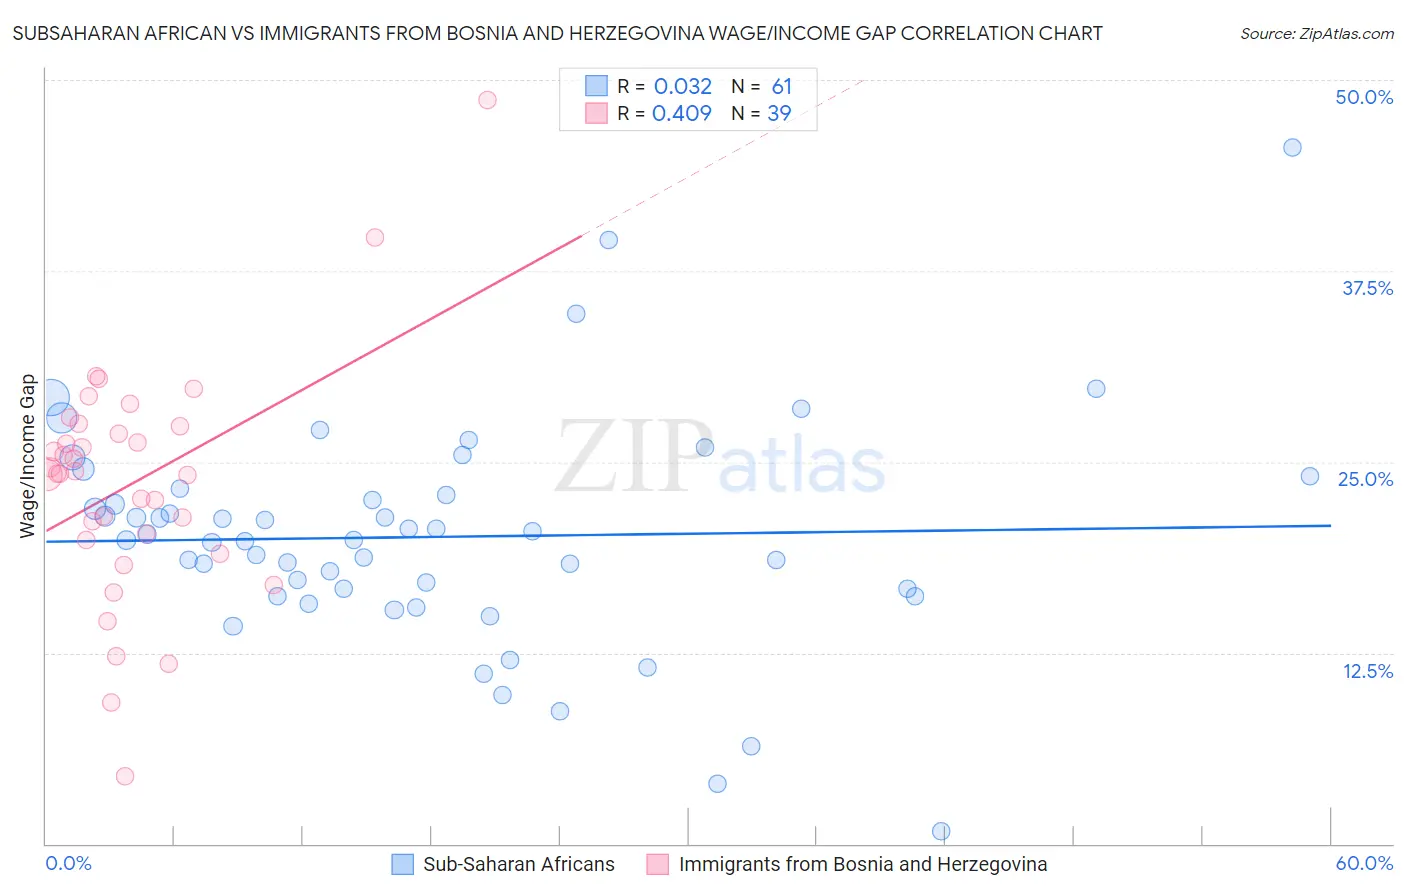 Subsaharan African vs Immigrants from Bosnia and Herzegovina Wage/Income Gap